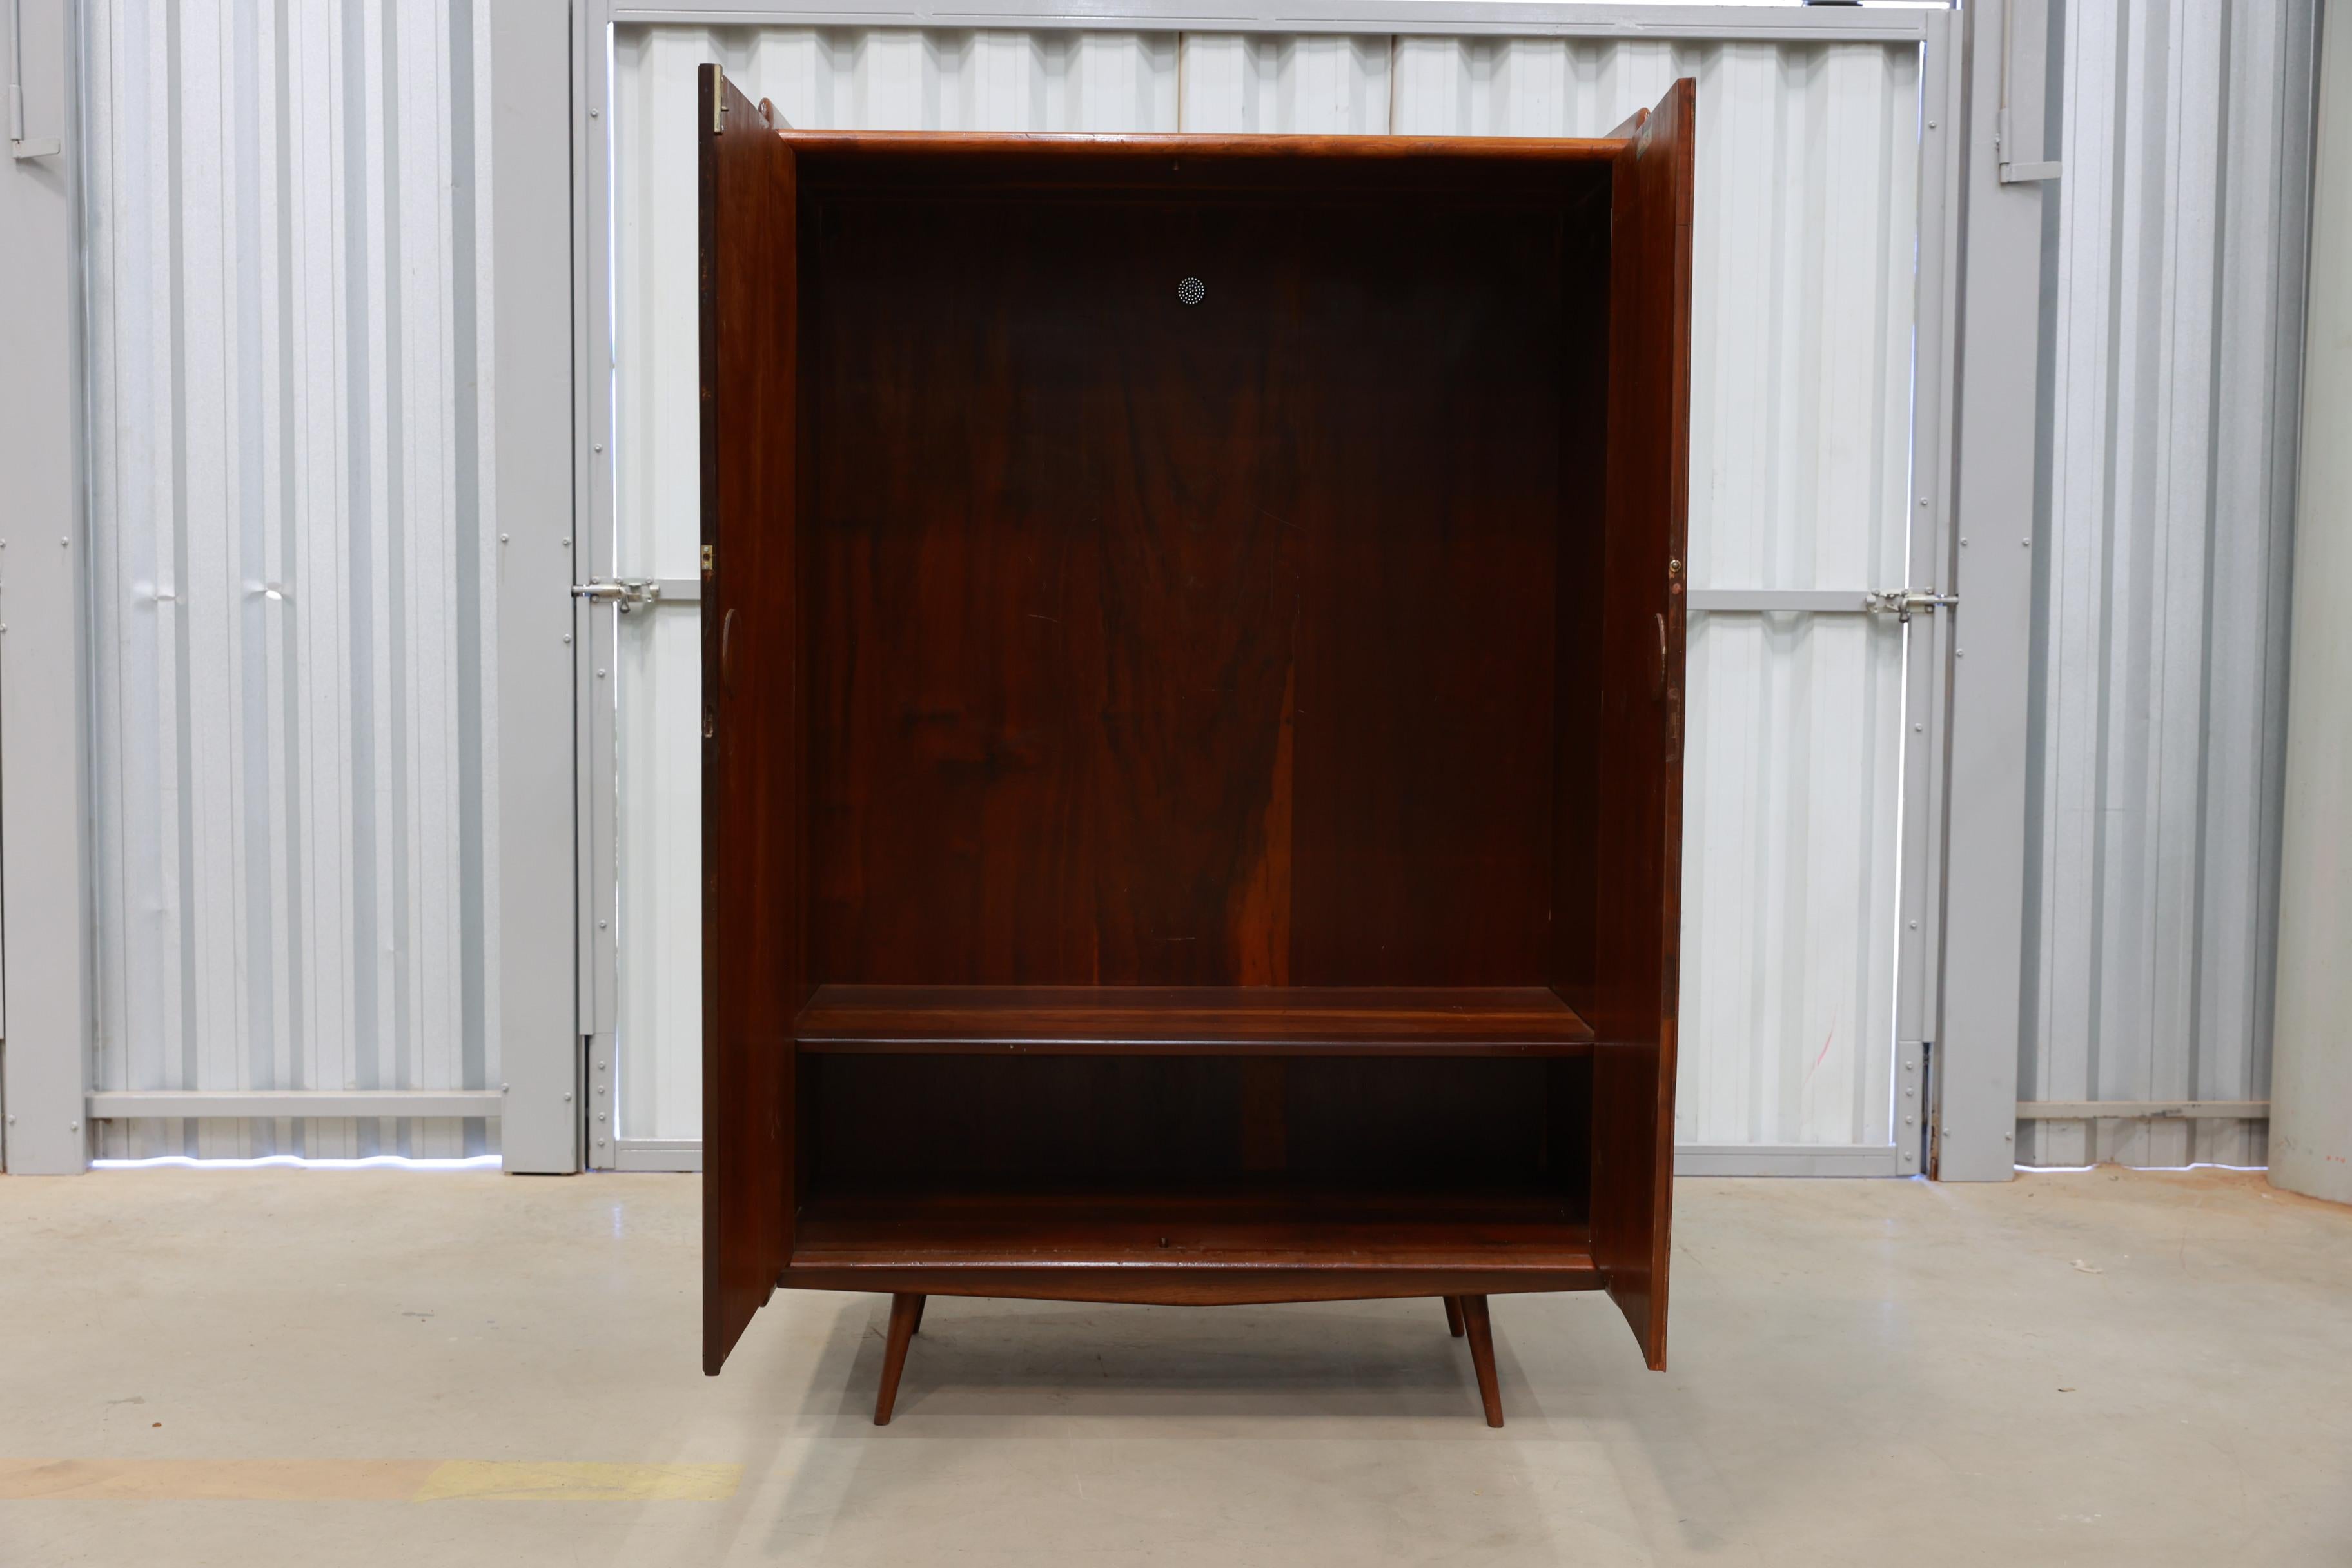 Brazilian Modern Armoire in Hardwood by Moveis Cimo, 1950s, Brazil In Good Condition For Sale In New York, NY